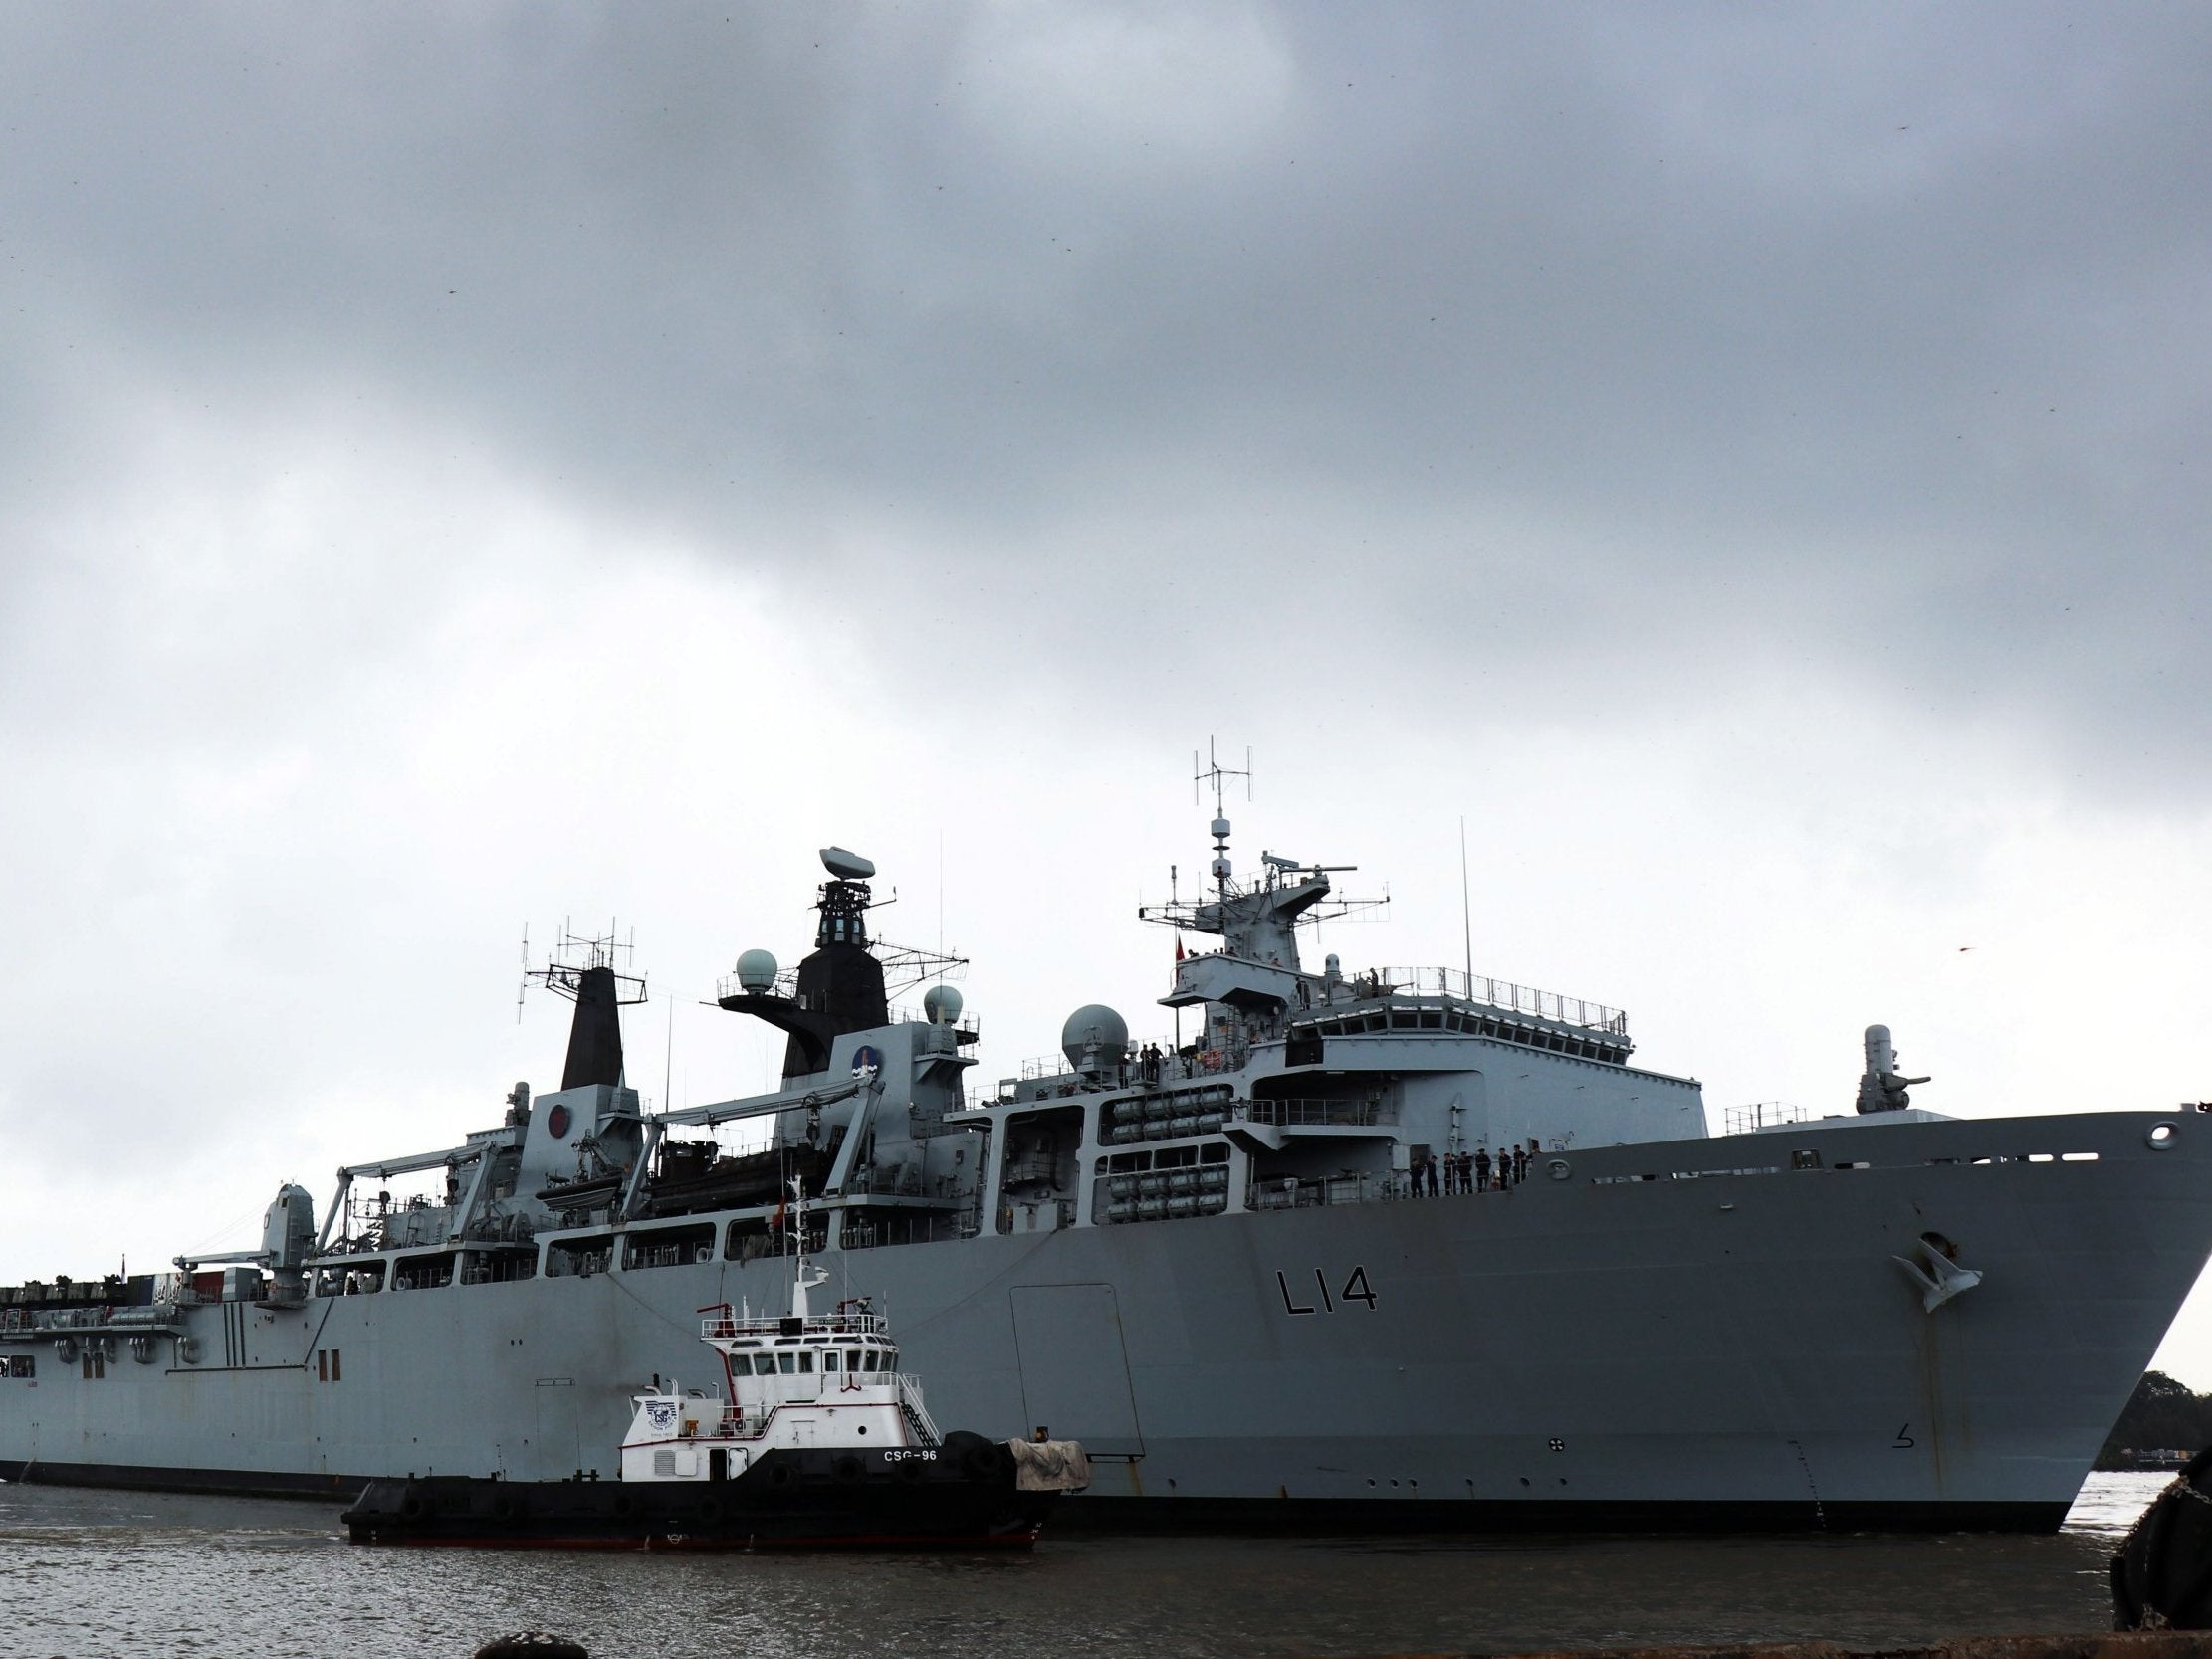 HMS Albion docked at a port in Ho Chi Minh, Vietnam, after it passed near the Paracel Islands in the disputed South China Sea